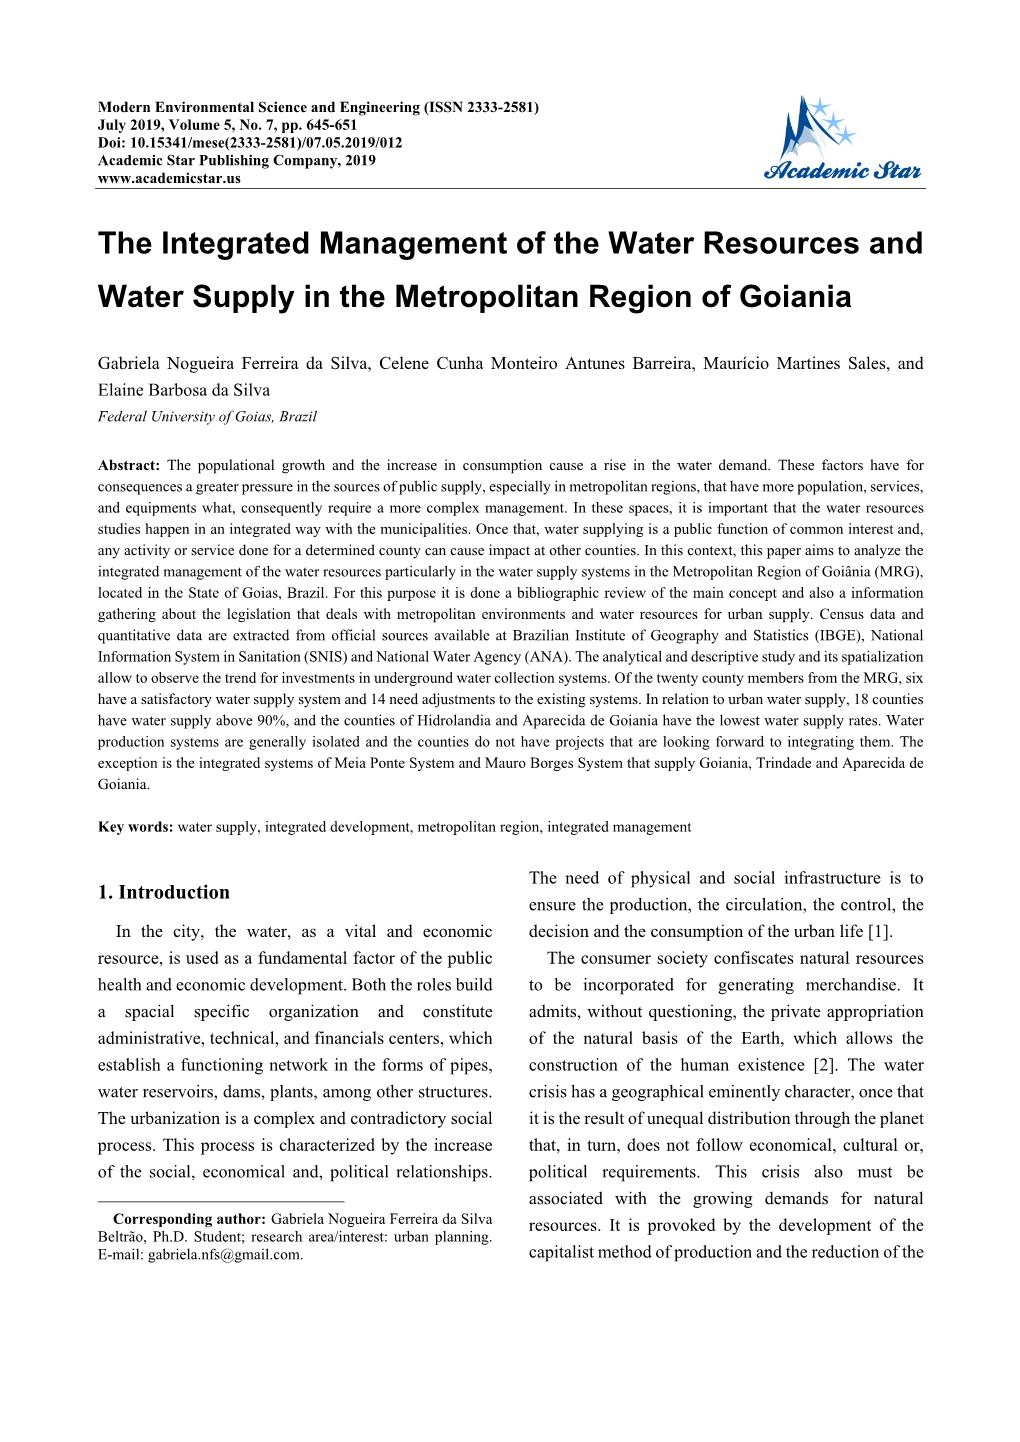 The Integrated Management of the Water Resources and Water Supply in the Metropolitan Region of Goiania